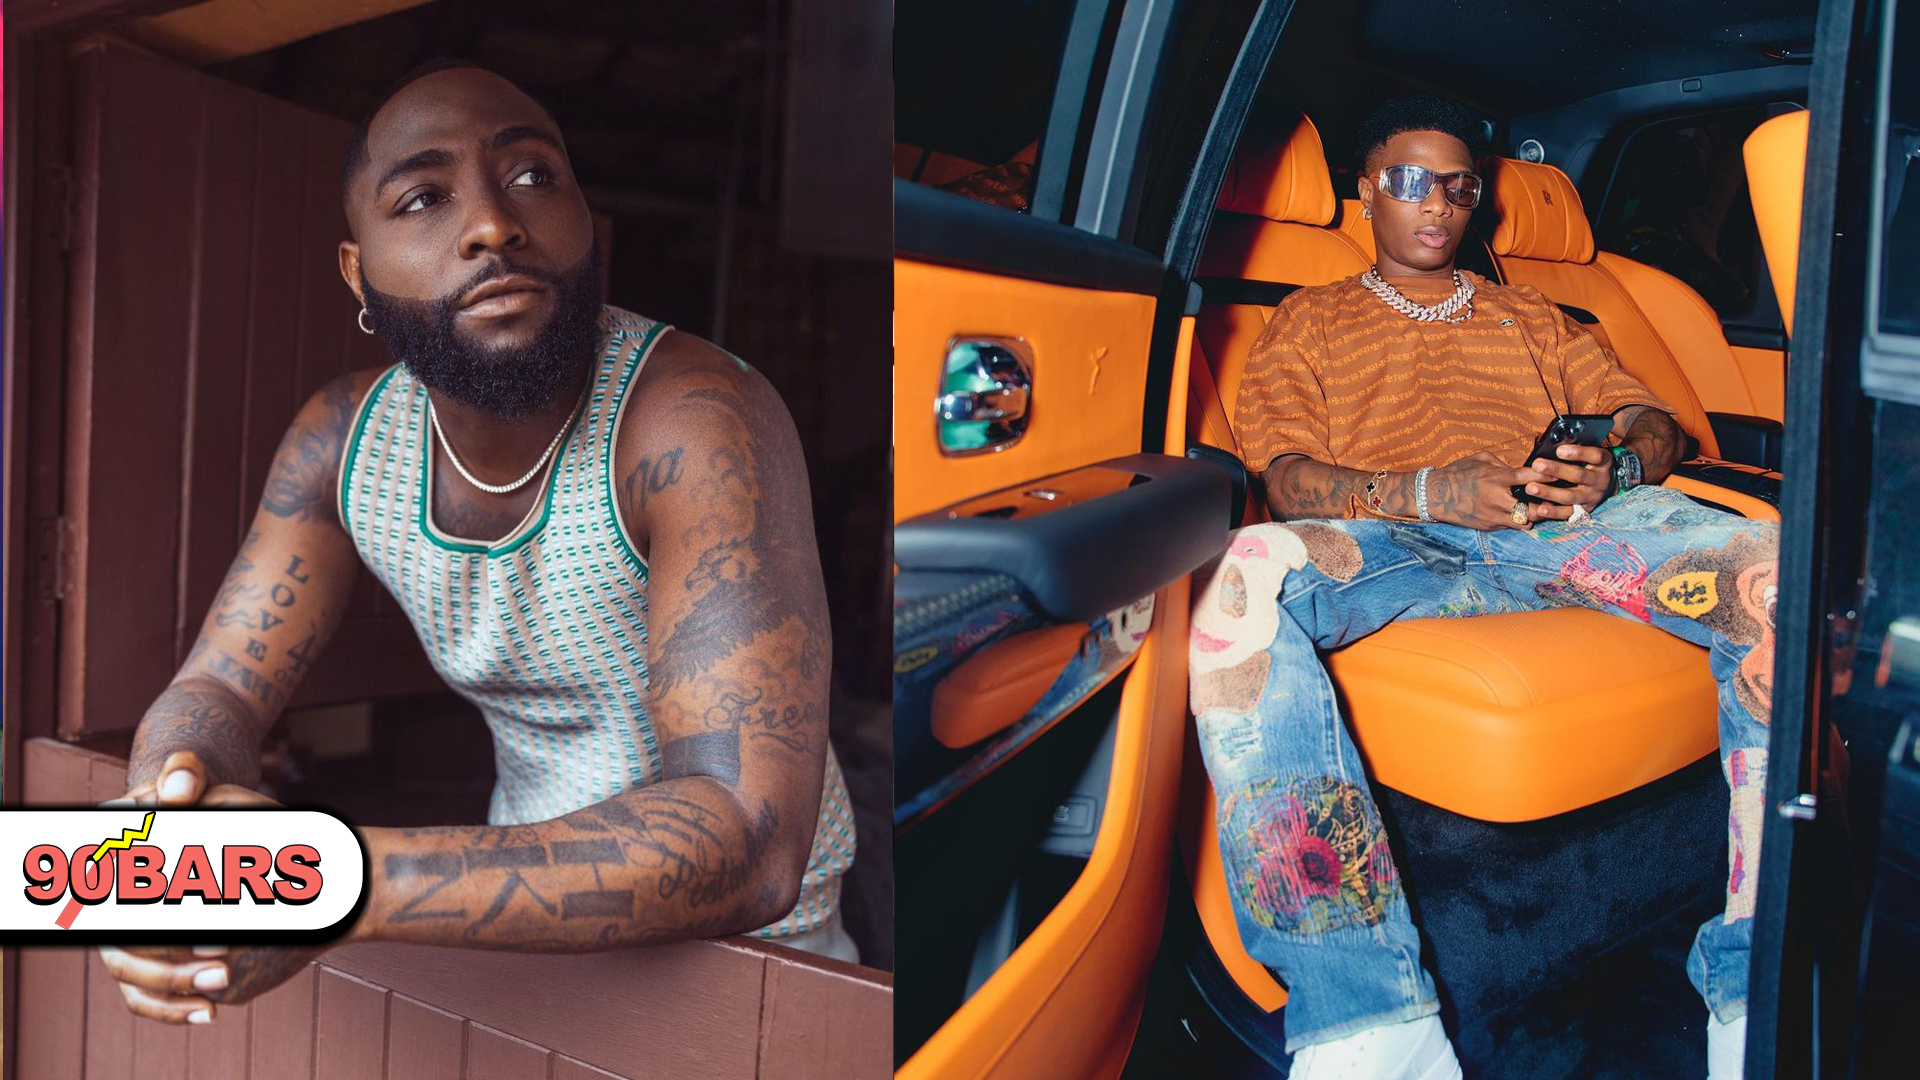 DAVIDO CLAIME WIZKID CALL TO CHECKED ON HIM EVERY WEEK